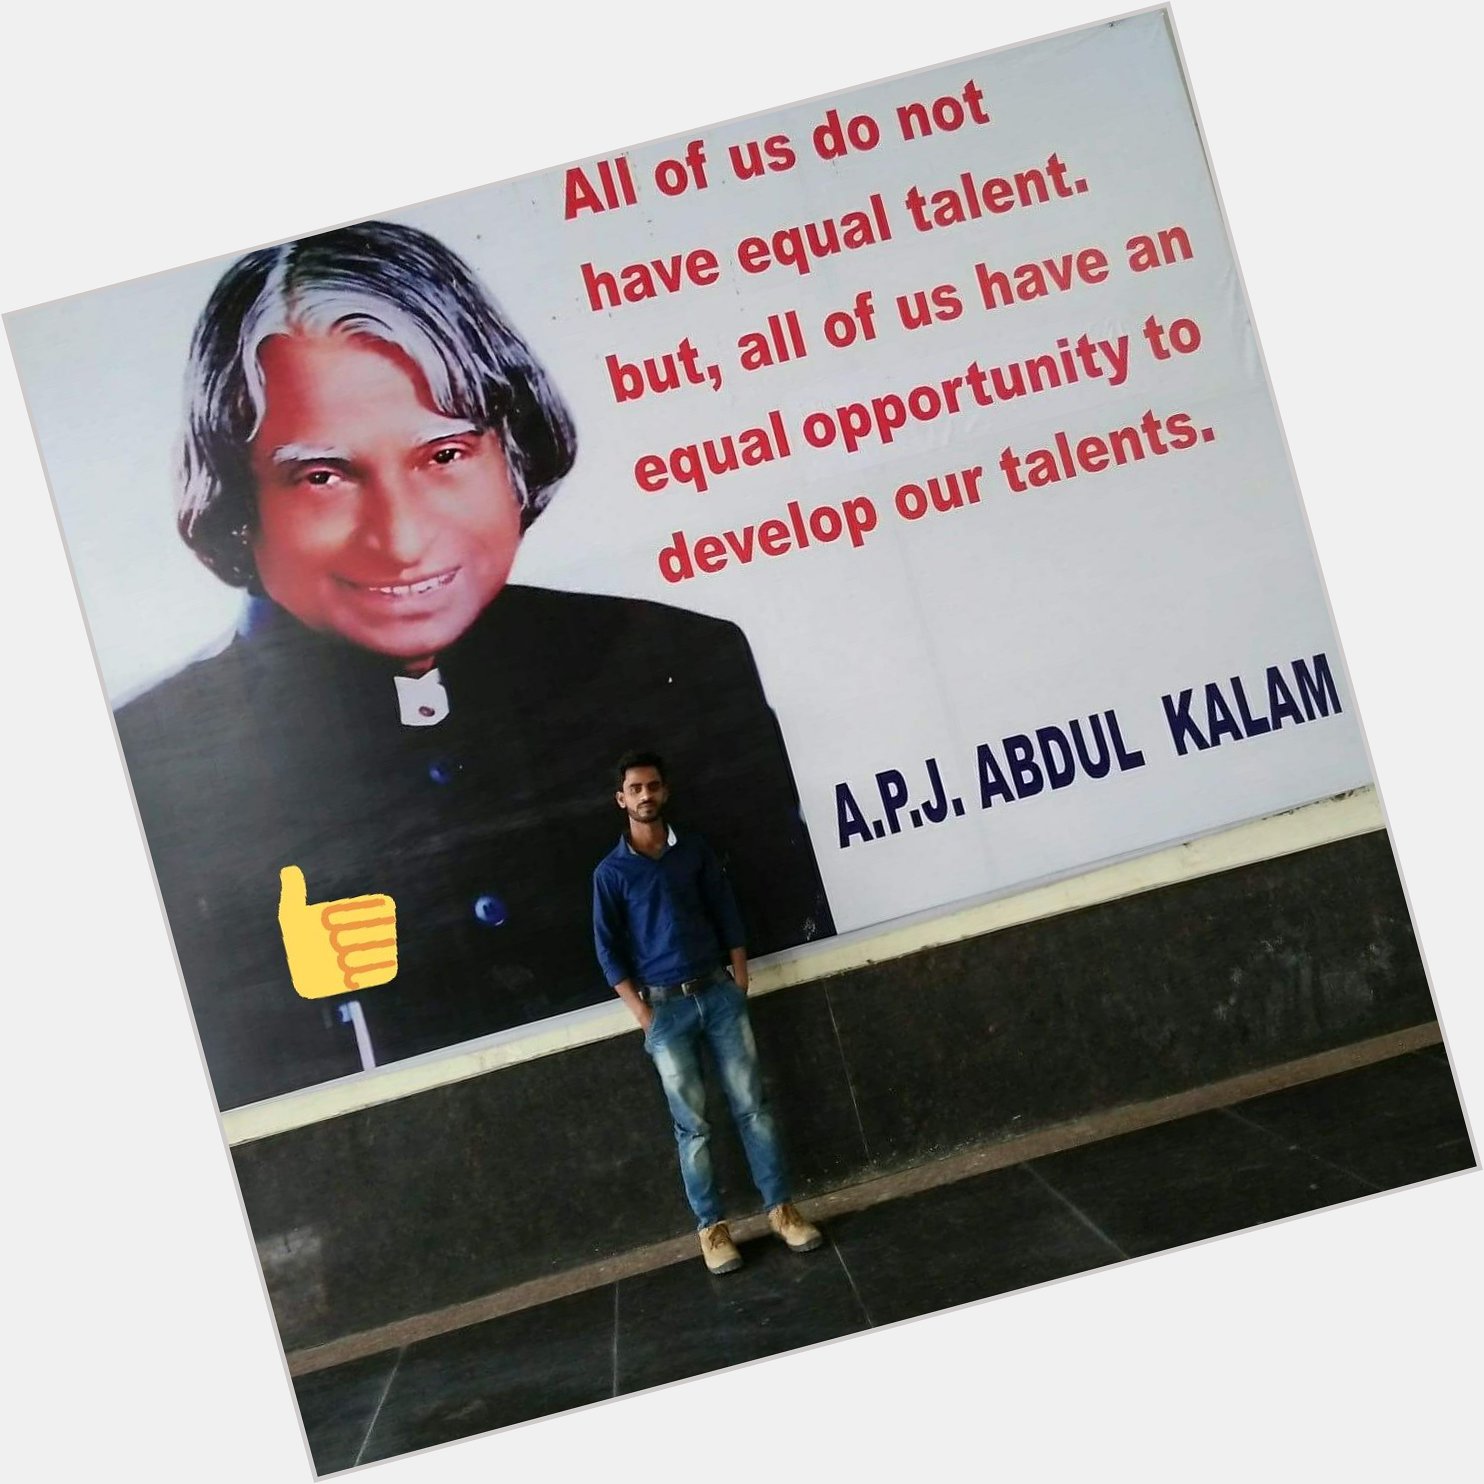 Wishing you very very happy birthday 
The Great Personality Dr.A.P.J.ABDUL KALAM SIR 